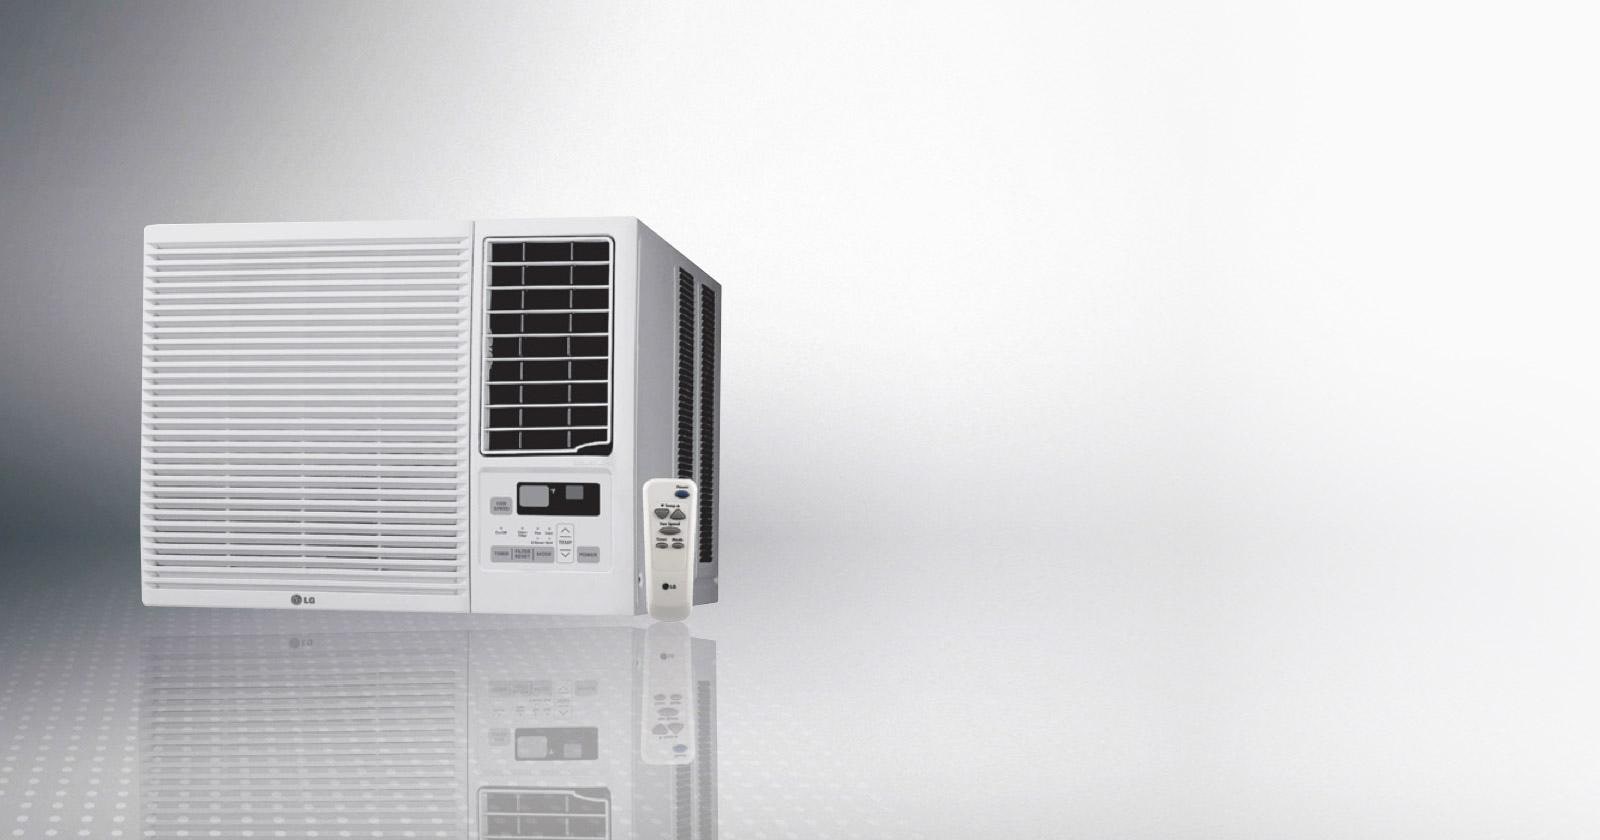 What are some air conditioners with positive reviews?